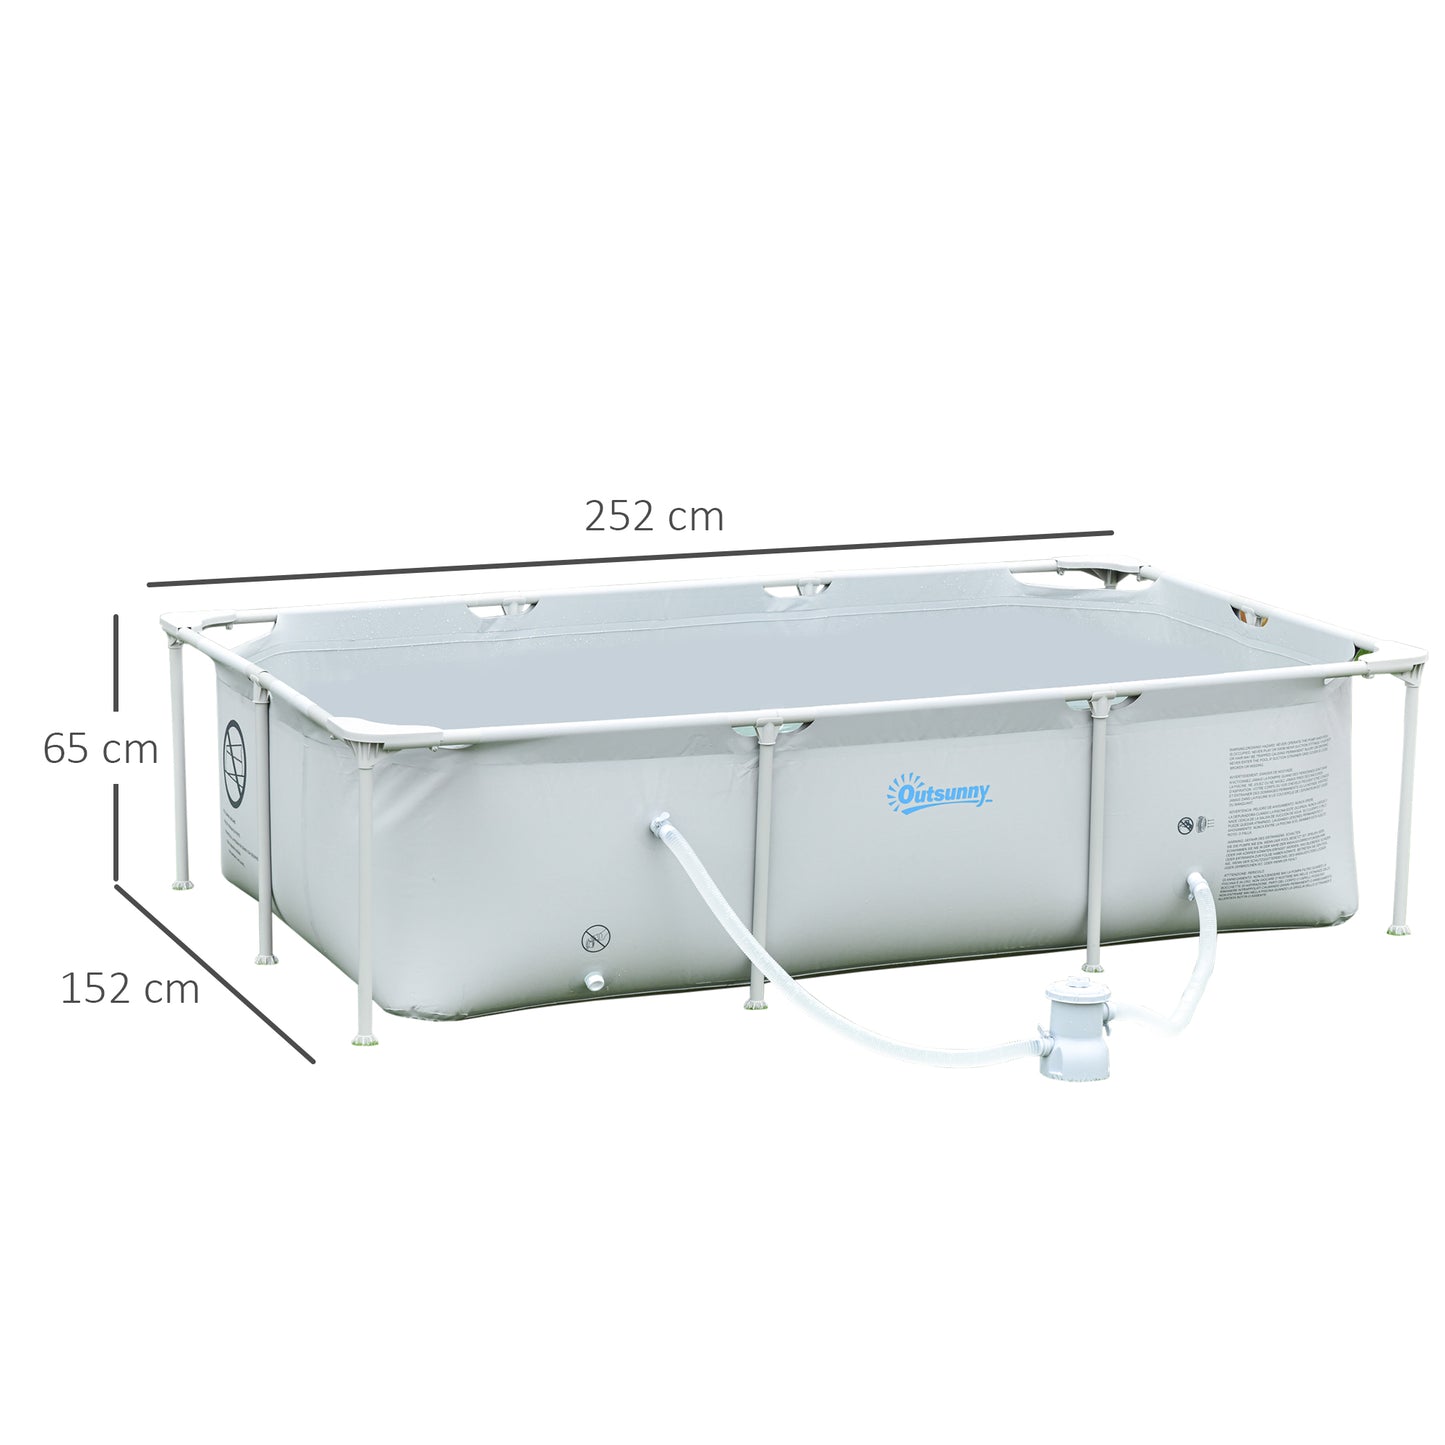 Outsunny Steel Frame Pool with Filter Pump and Filter Cartridge Rust Resistant Above Ground Pool with Reinforced Sidewalls, 252 x 152 x 65cm, Grey